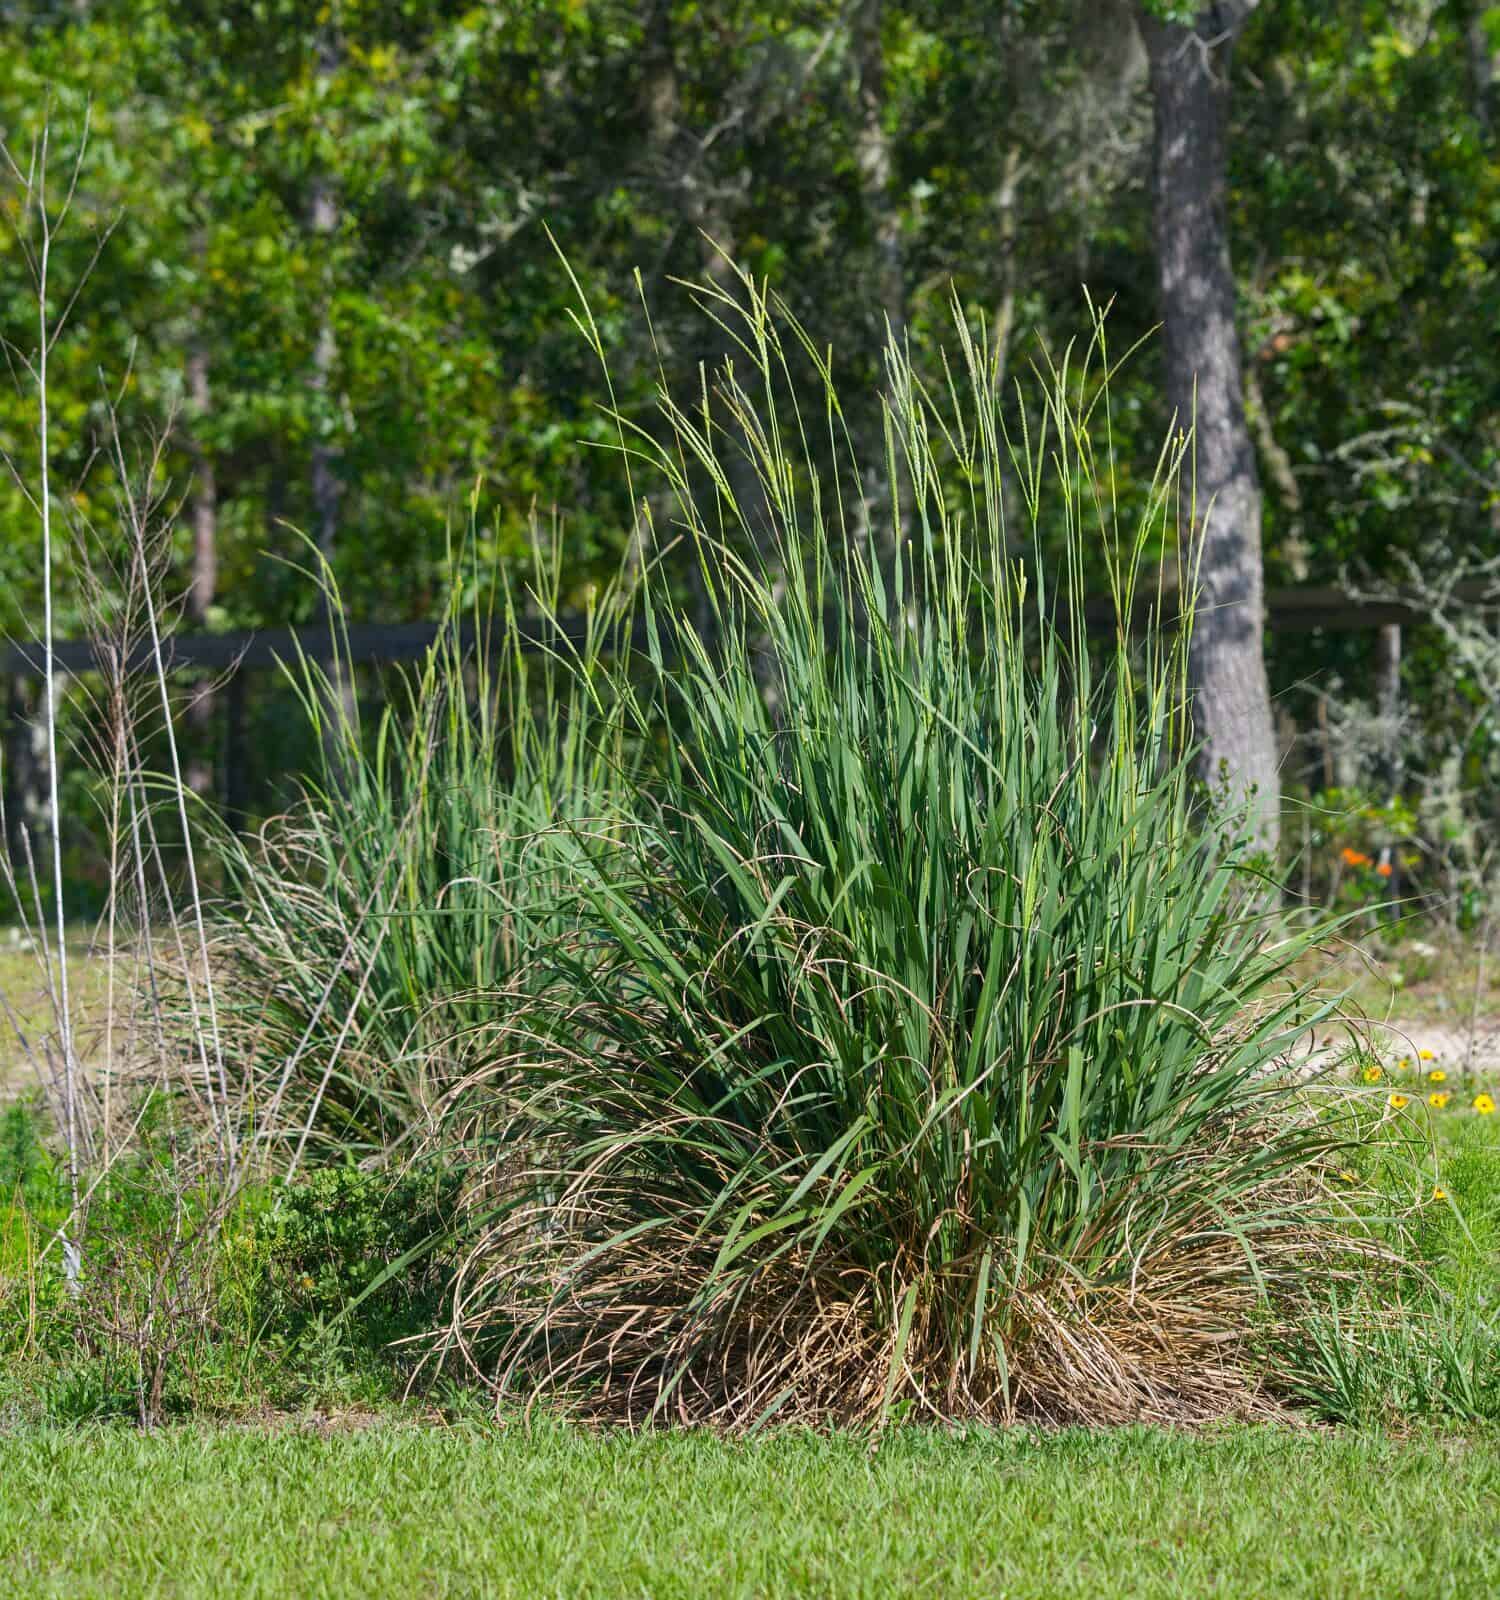 Eastern Gamagrass, Fakahatchee Grass - Tripsacum dactyloides - large clumps provide cover for small mammals, birds, and reptiles. Deer eat the seeds. Tall seed stalks visible. Ocala, Florida